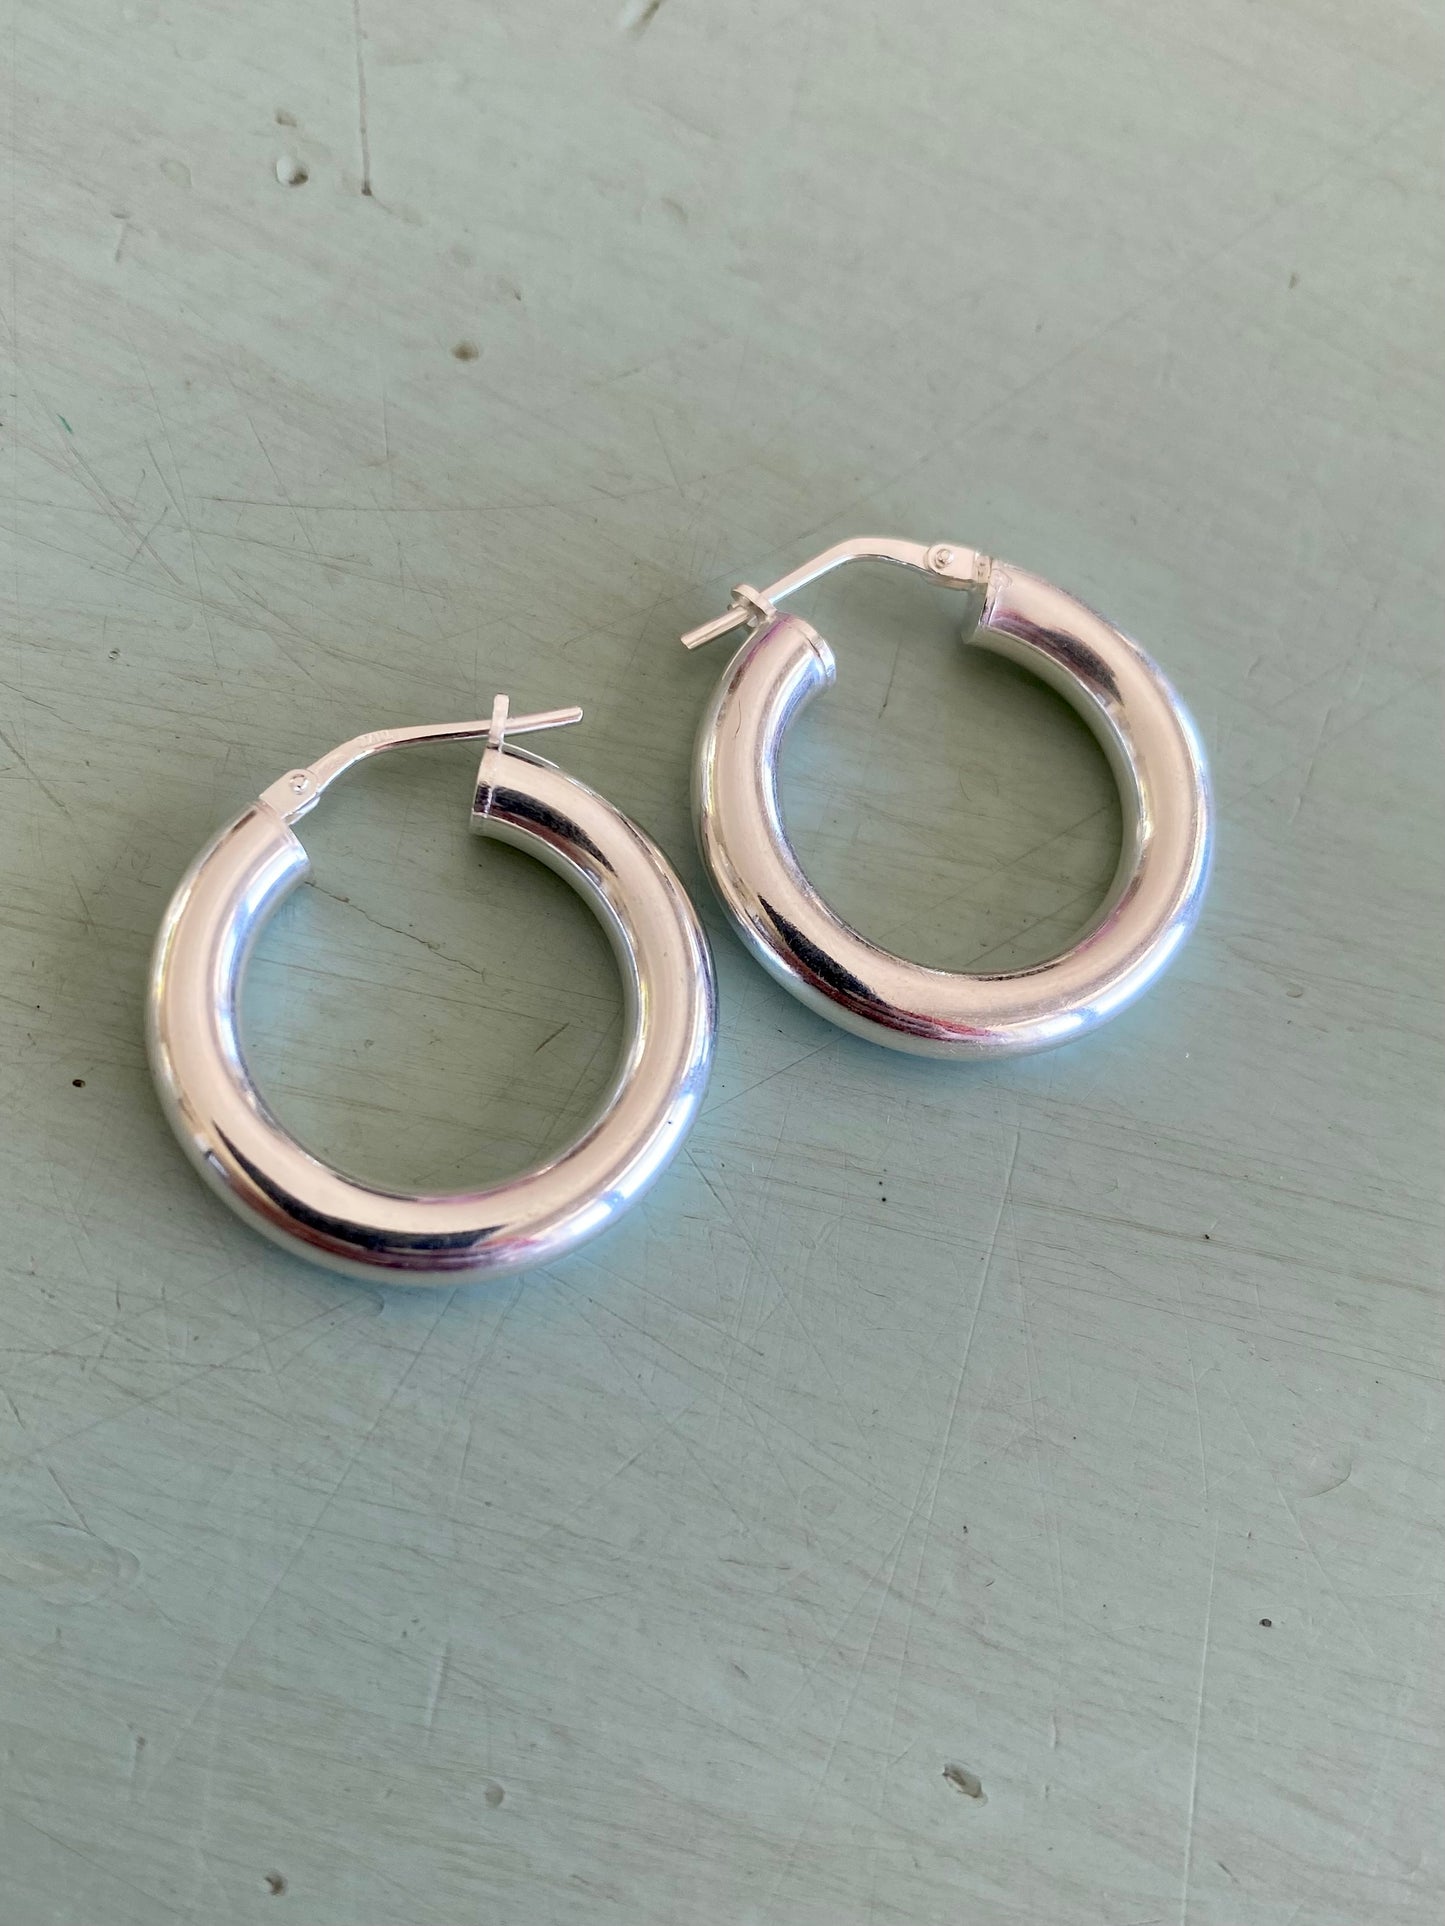 Close-up of polished sterling silver hoop earrings showcasing their simple clasp and elegant thickness.